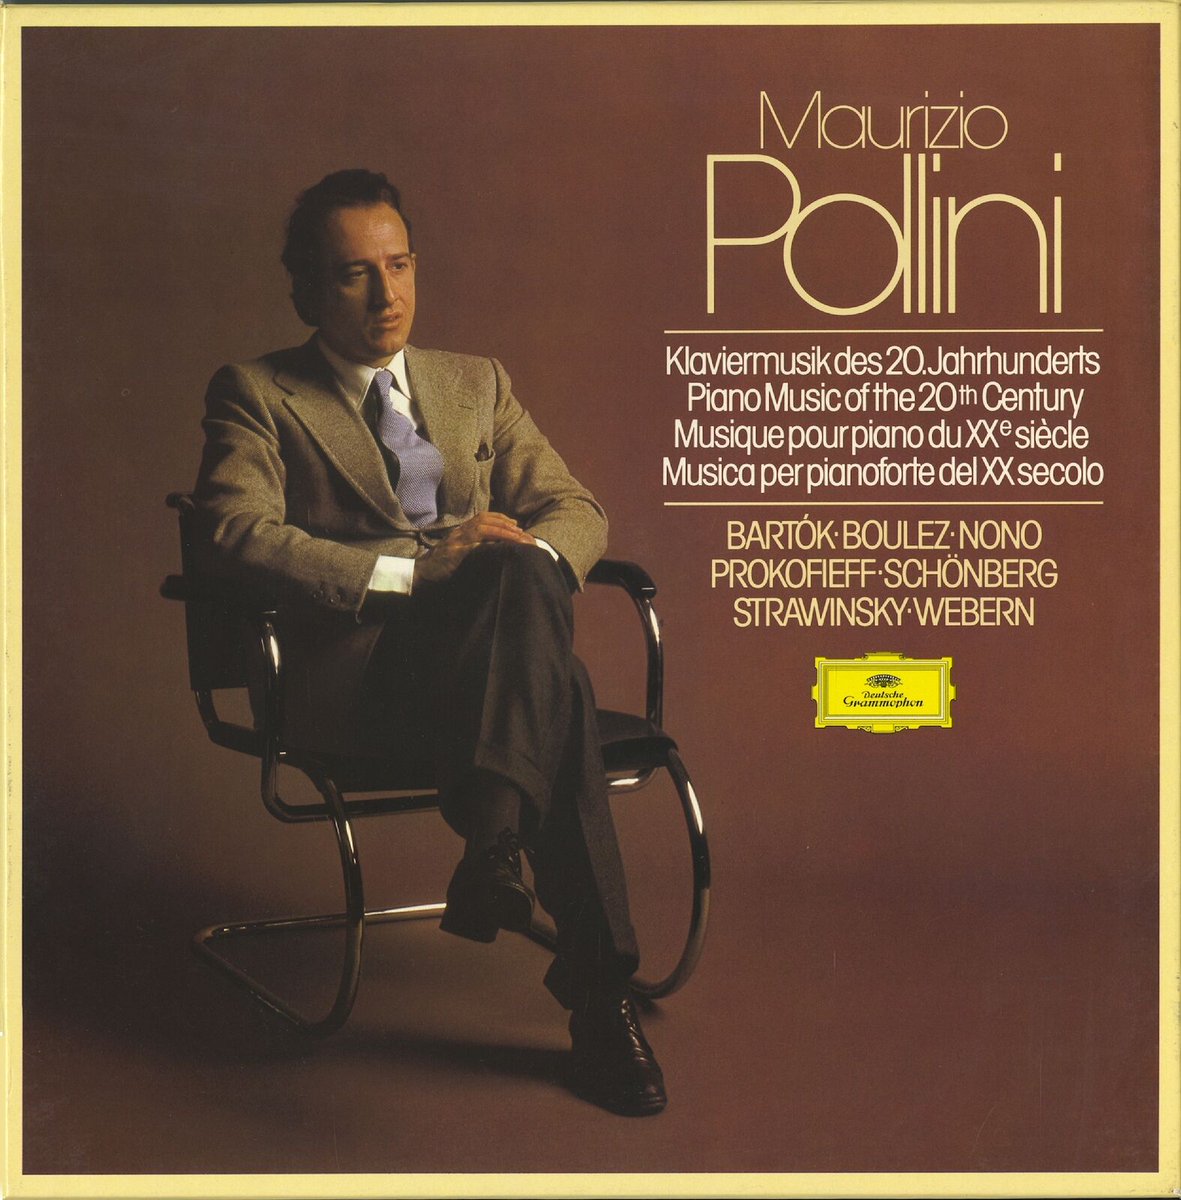 Sorry to learn of the death of the Italian pianist Maurizio Pollini at the age of 82. His recordings of 20th Century masters, leaning into modernists from Stravinsky, Bartok, Schoenberg, Boulez, Nono etc. remain an imposing legacy. I've lived with this LP box for decades. R.I.P.